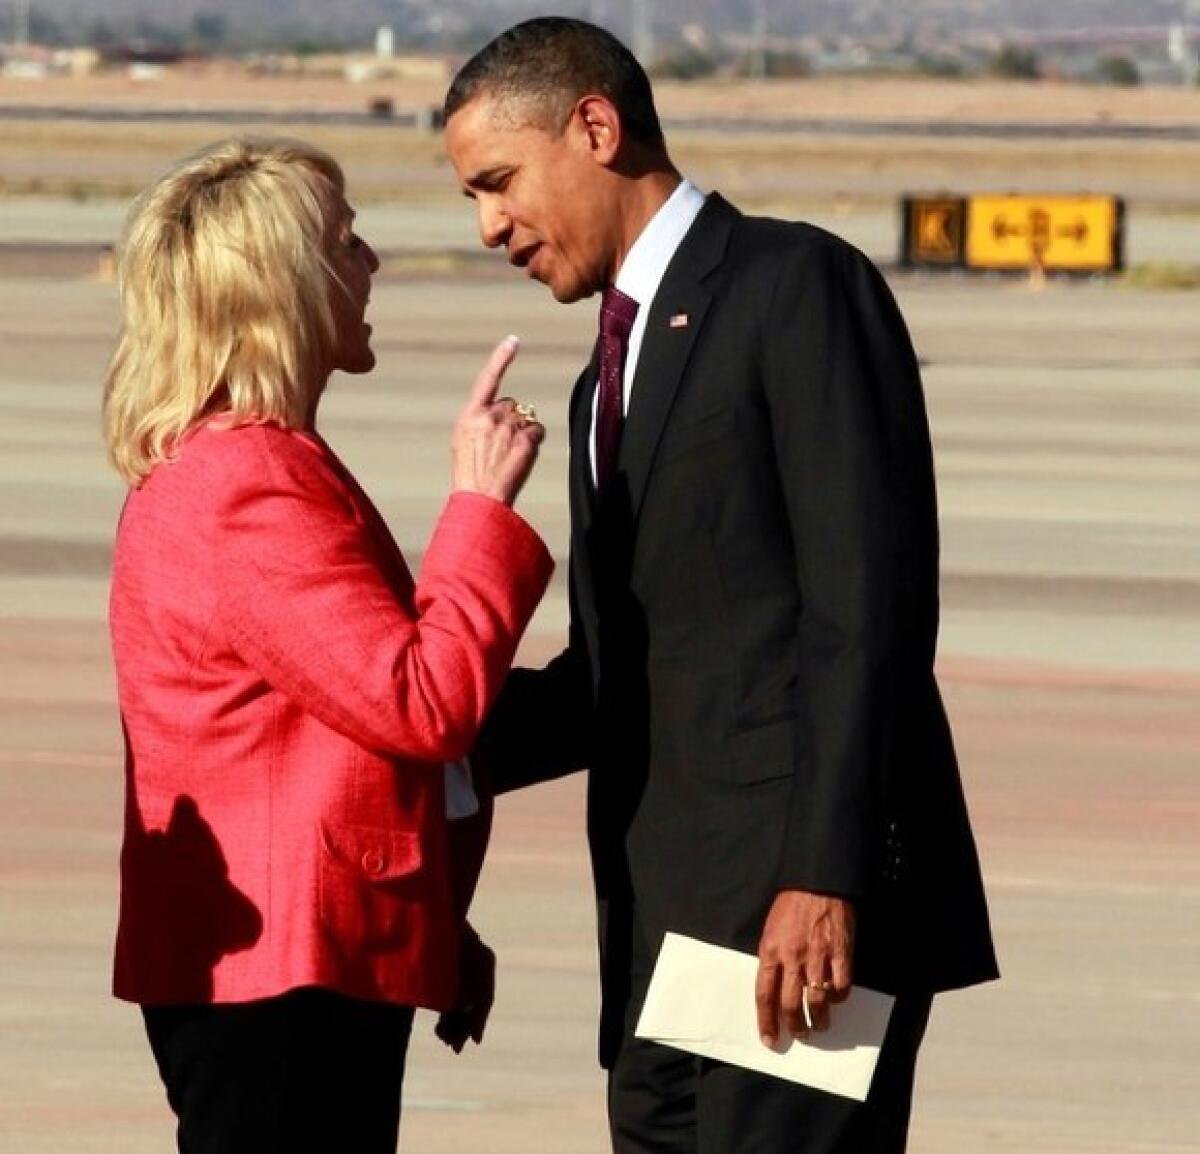 Arizona Gov. Jan Brewer and President Obama in an animated exchange at the airport in Phoenix.